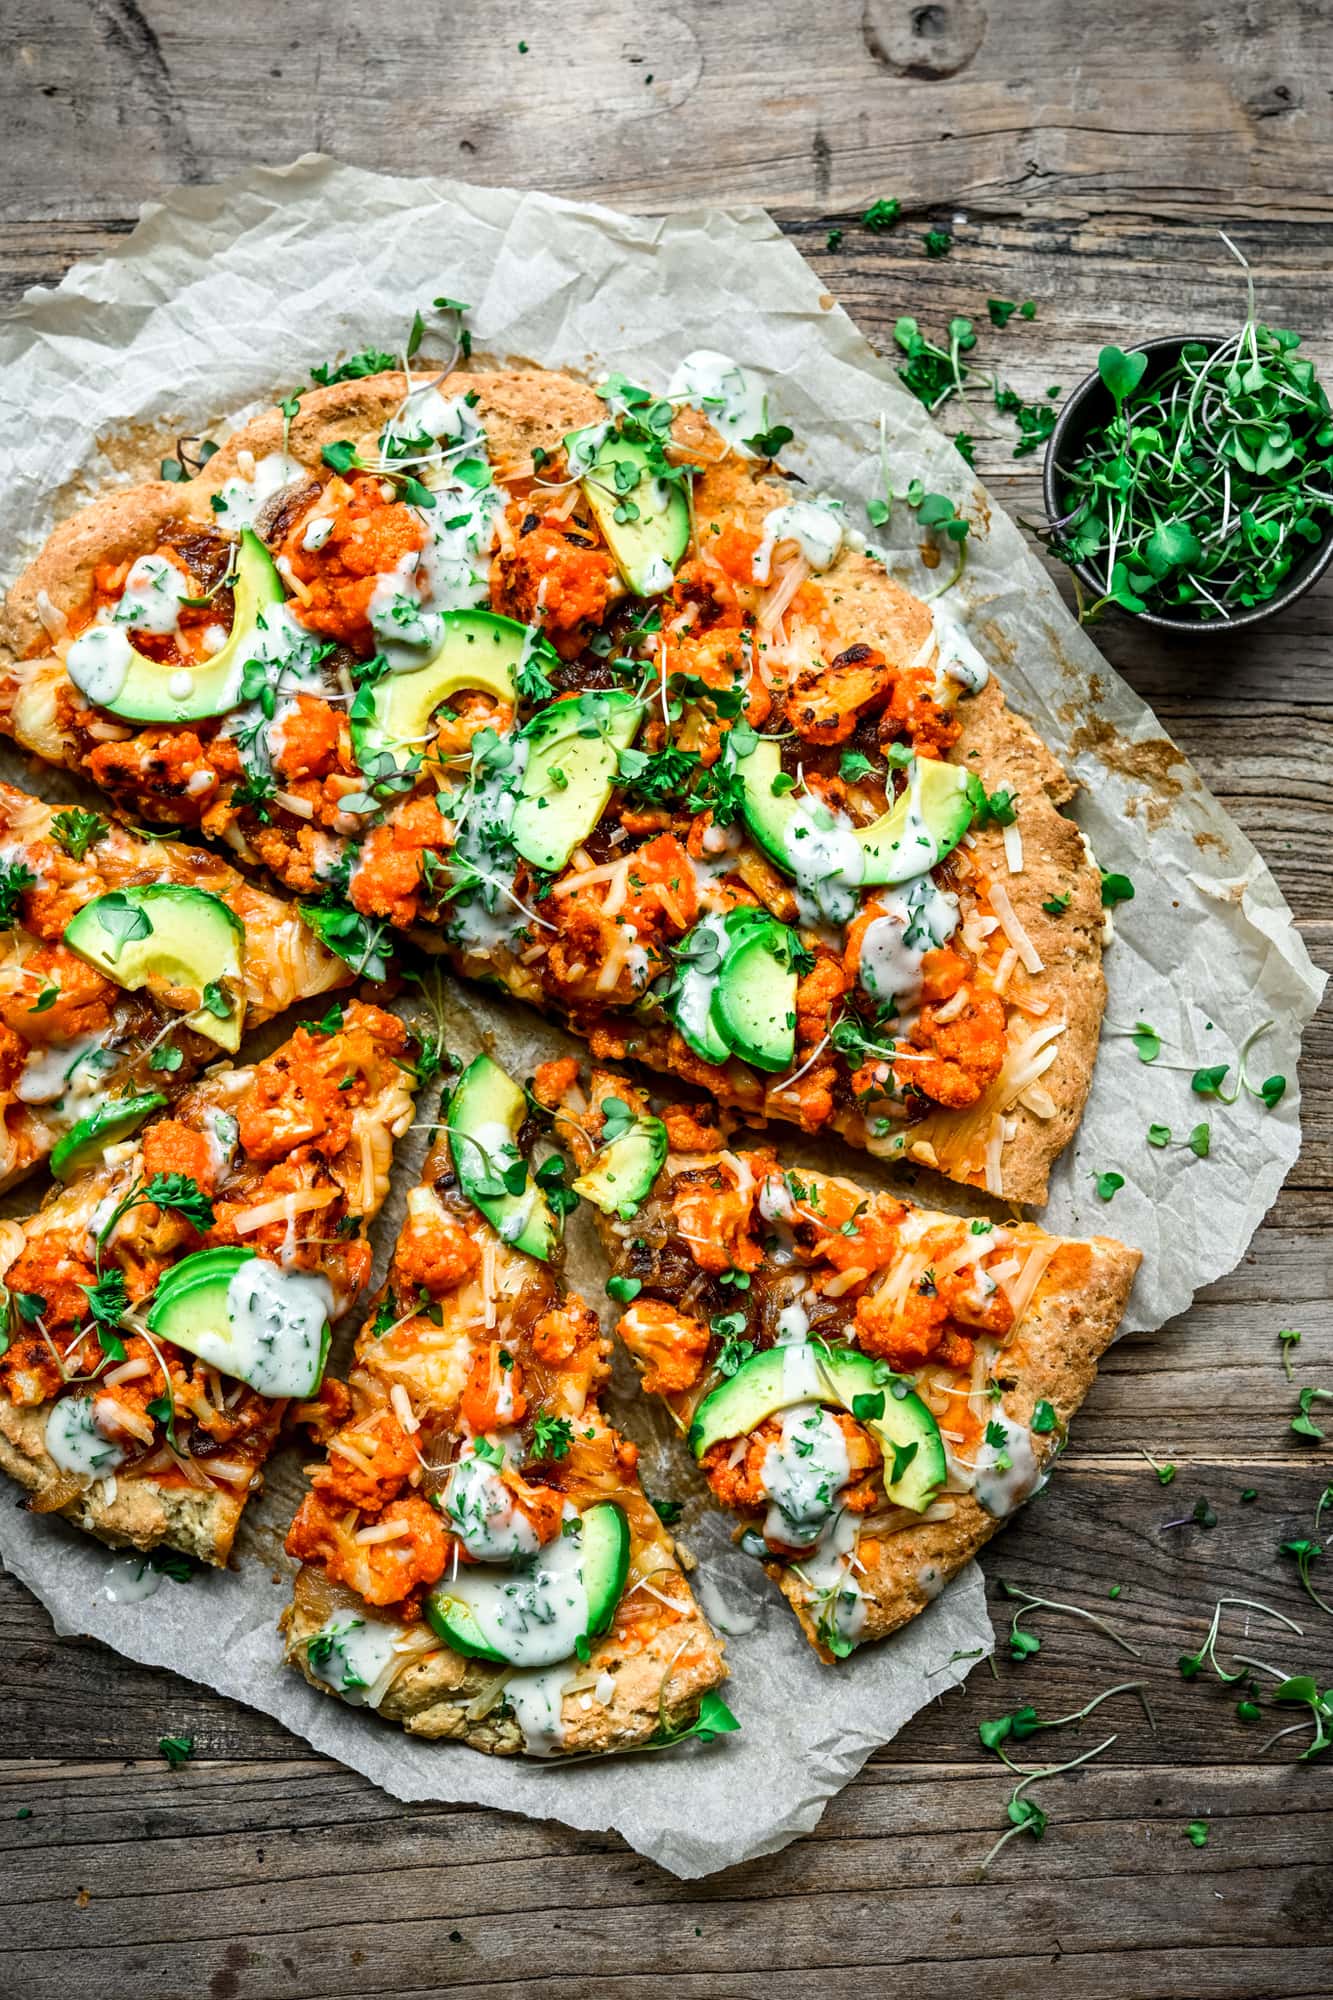 Overhead view of sliced vegan buffalo cauliflower pizza with avocado slices and ranch drizzle on parchment paper